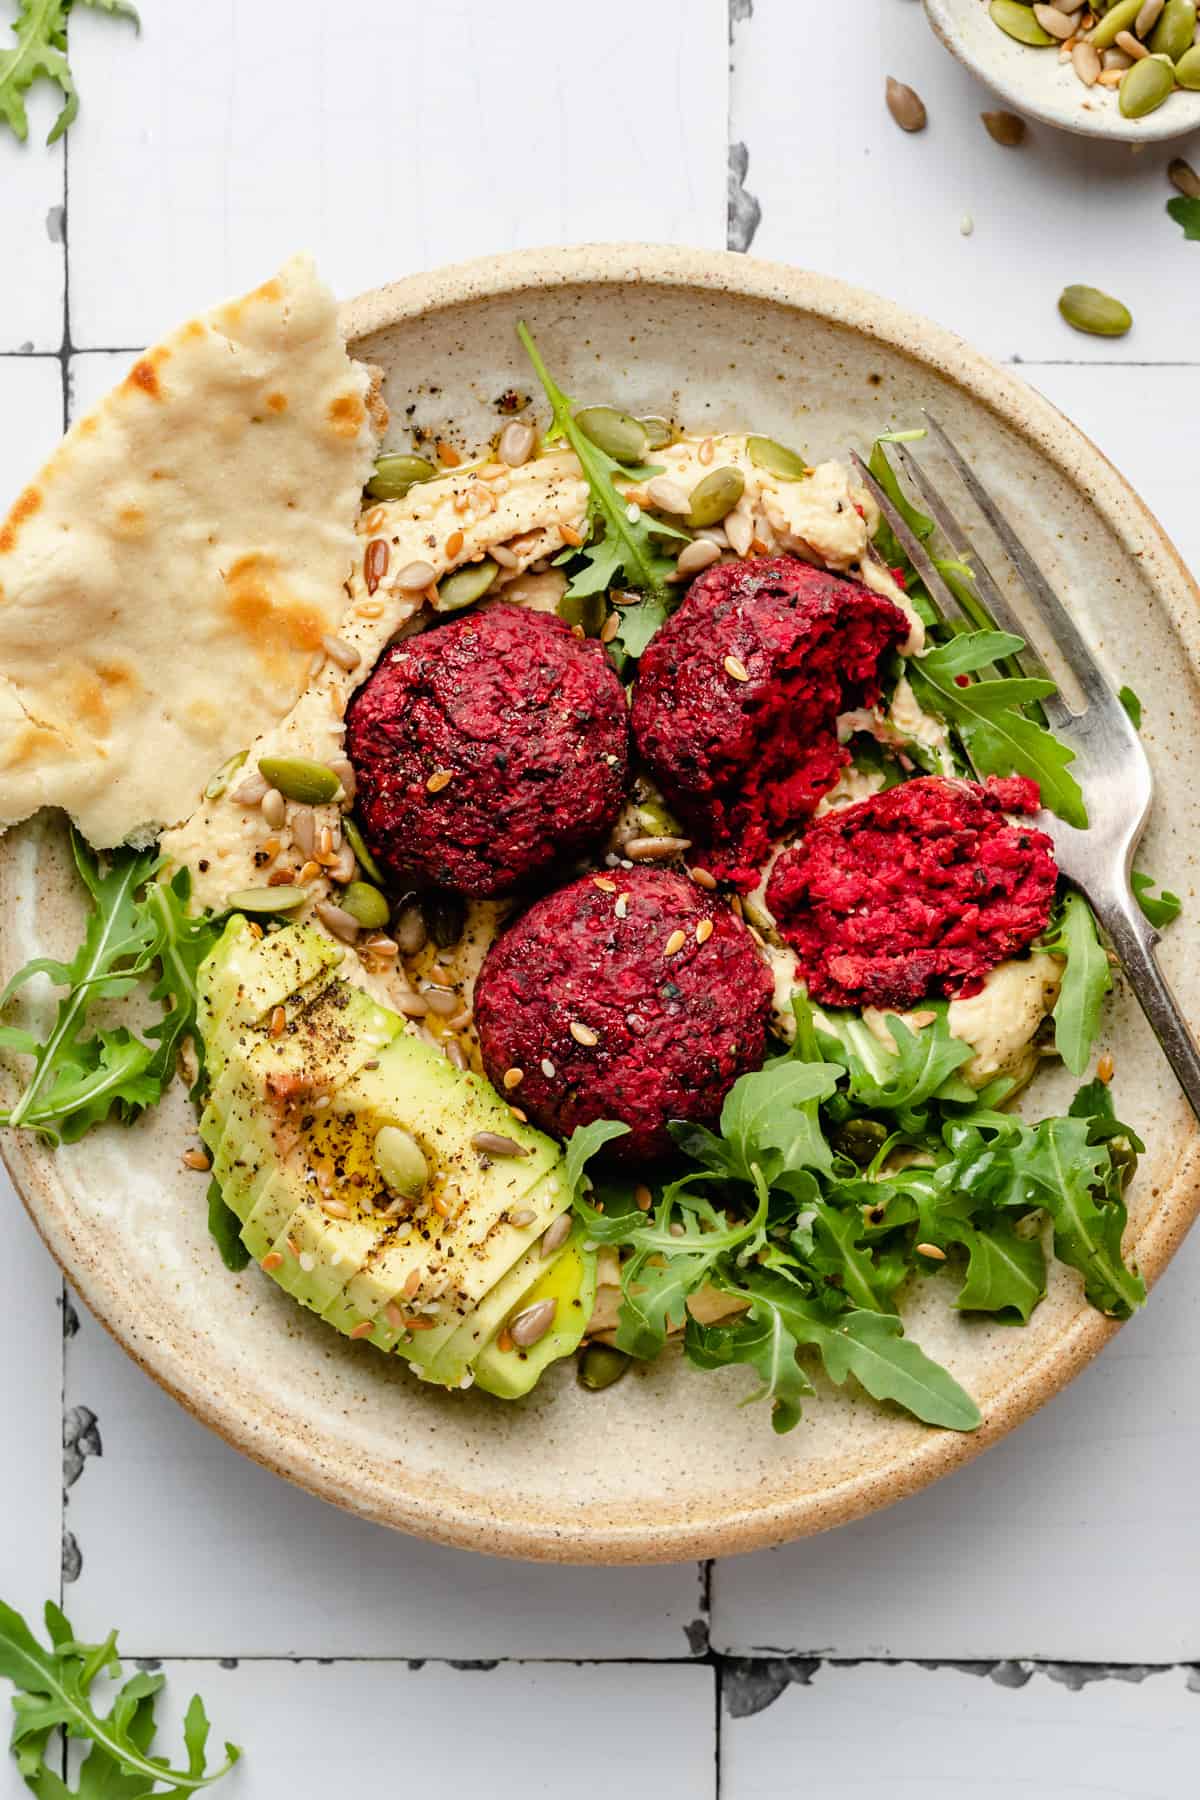 A bowl of beetroot falafels served on top of hummus, with avocado and pita bread, drizzled with oil and seeds.